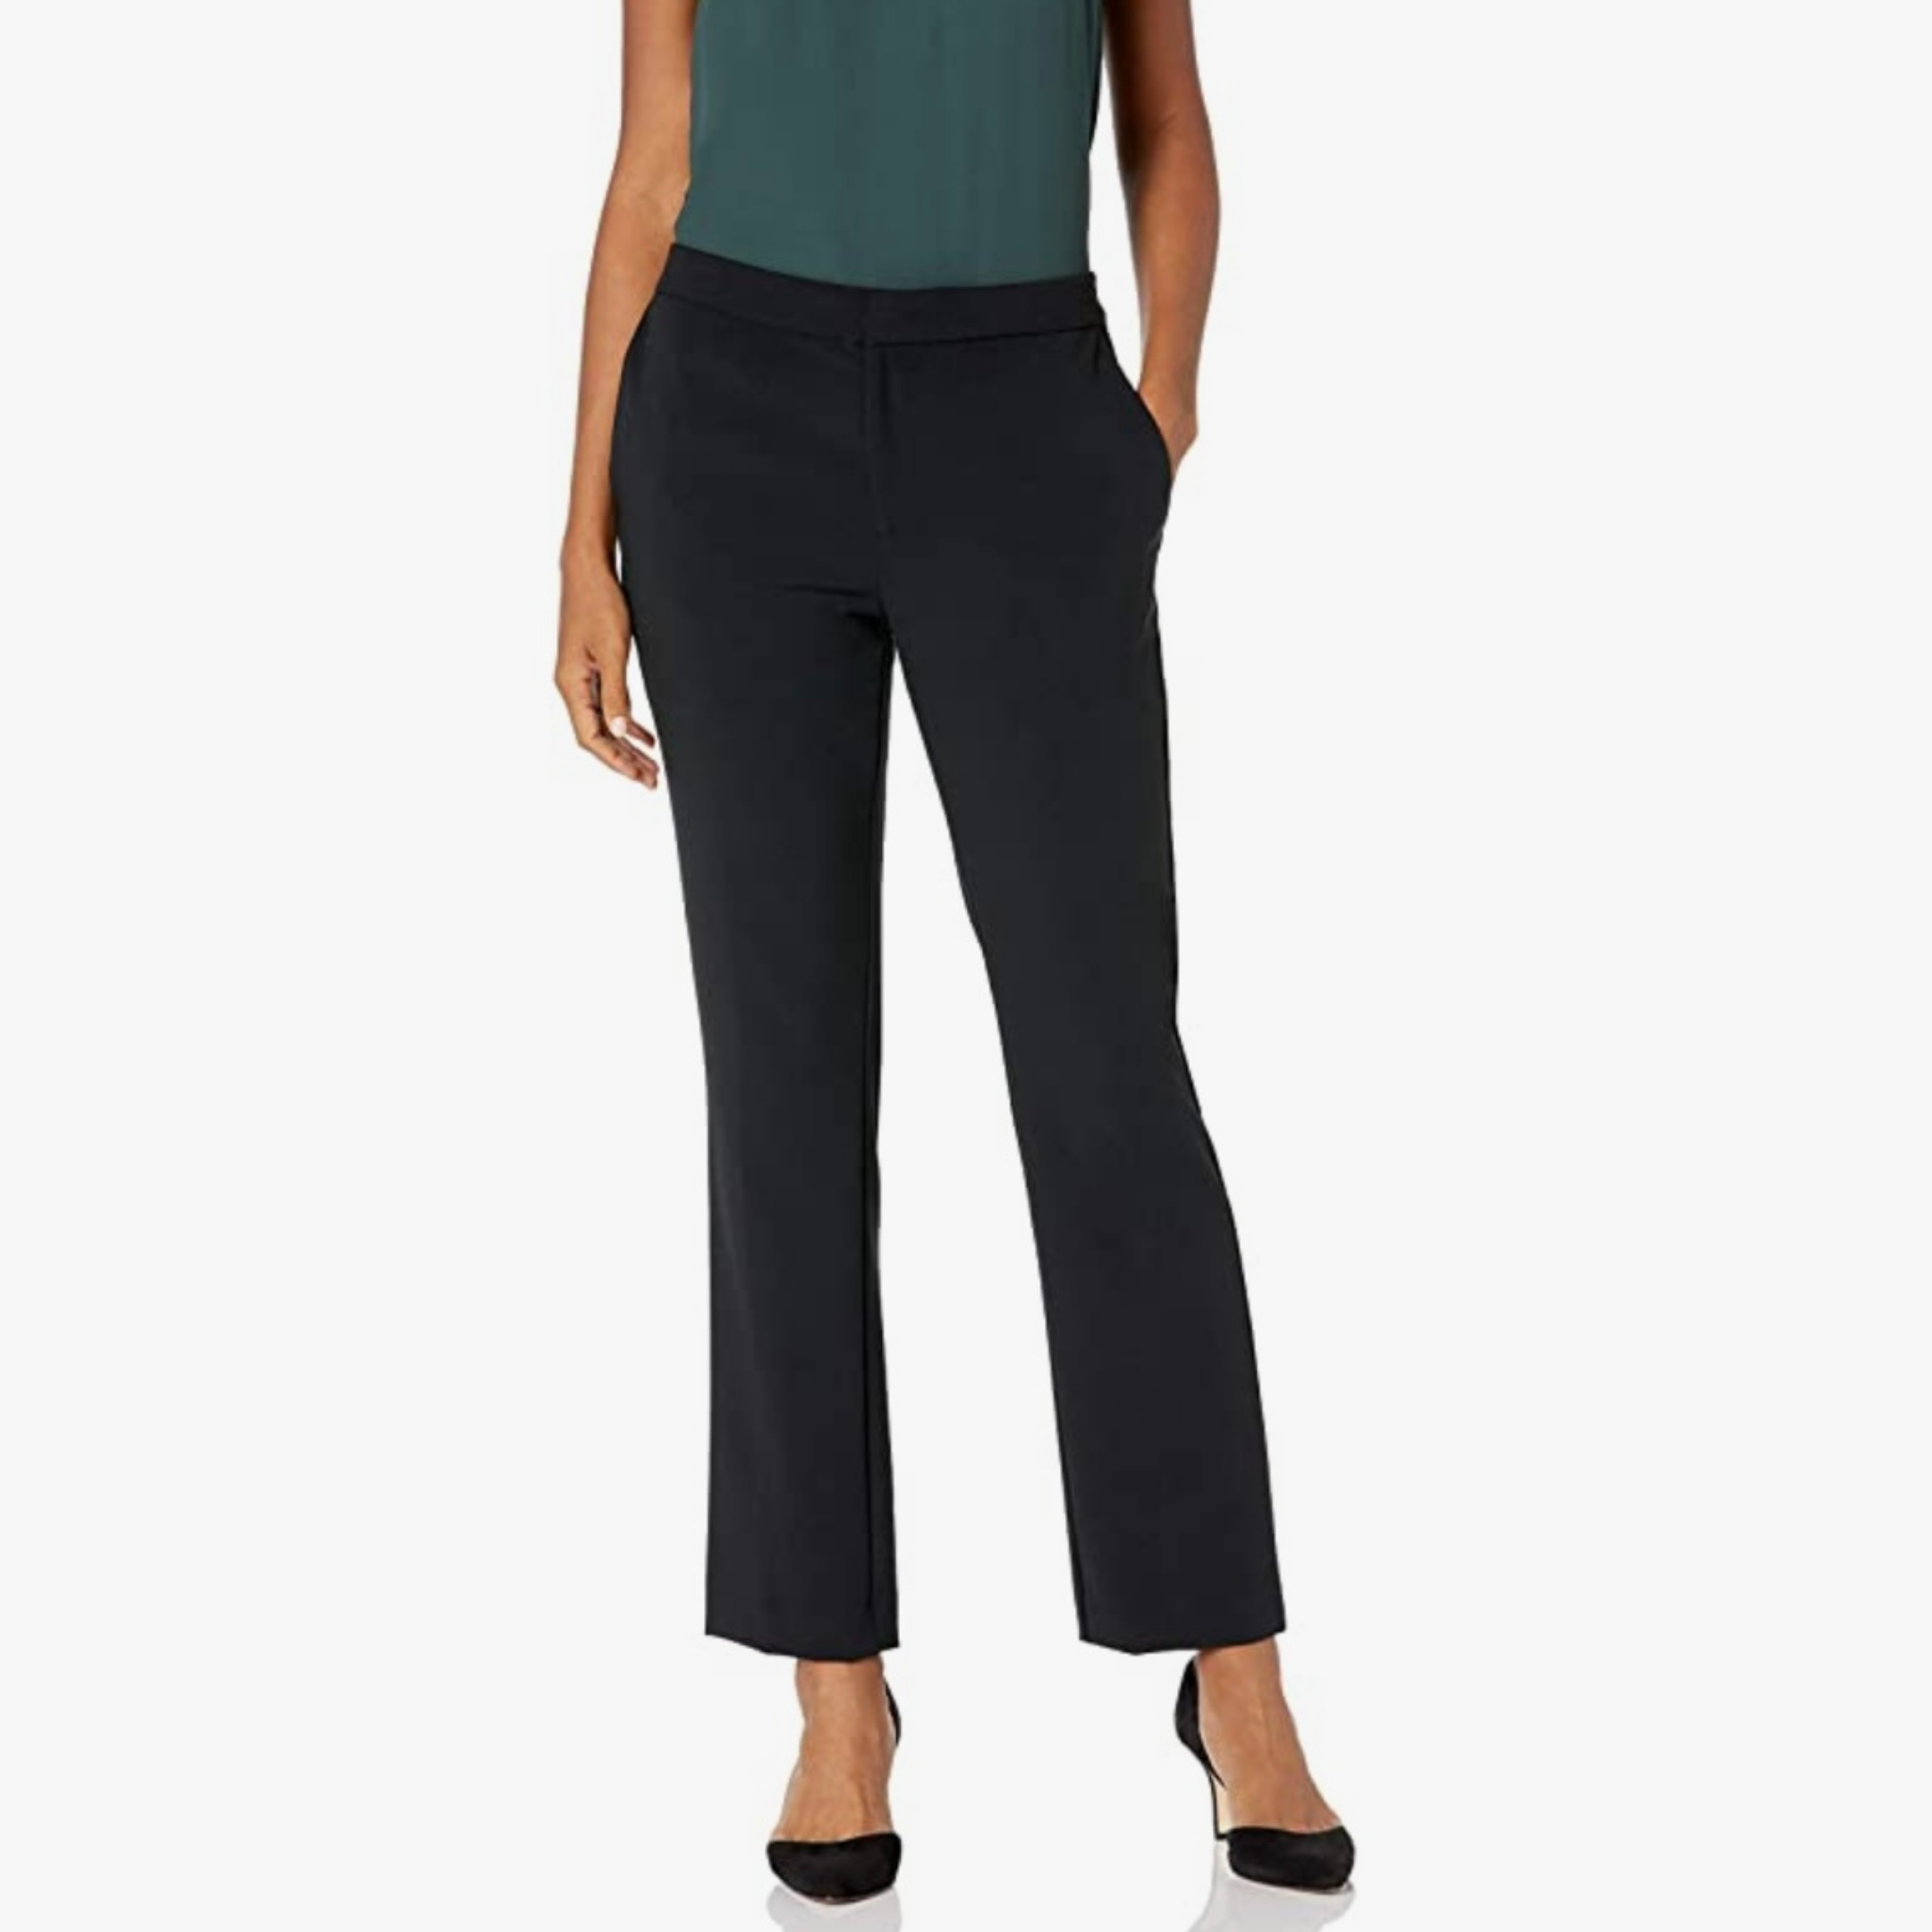 11 Stylish Trousers On Sale For Amazon Prime Day - Essence